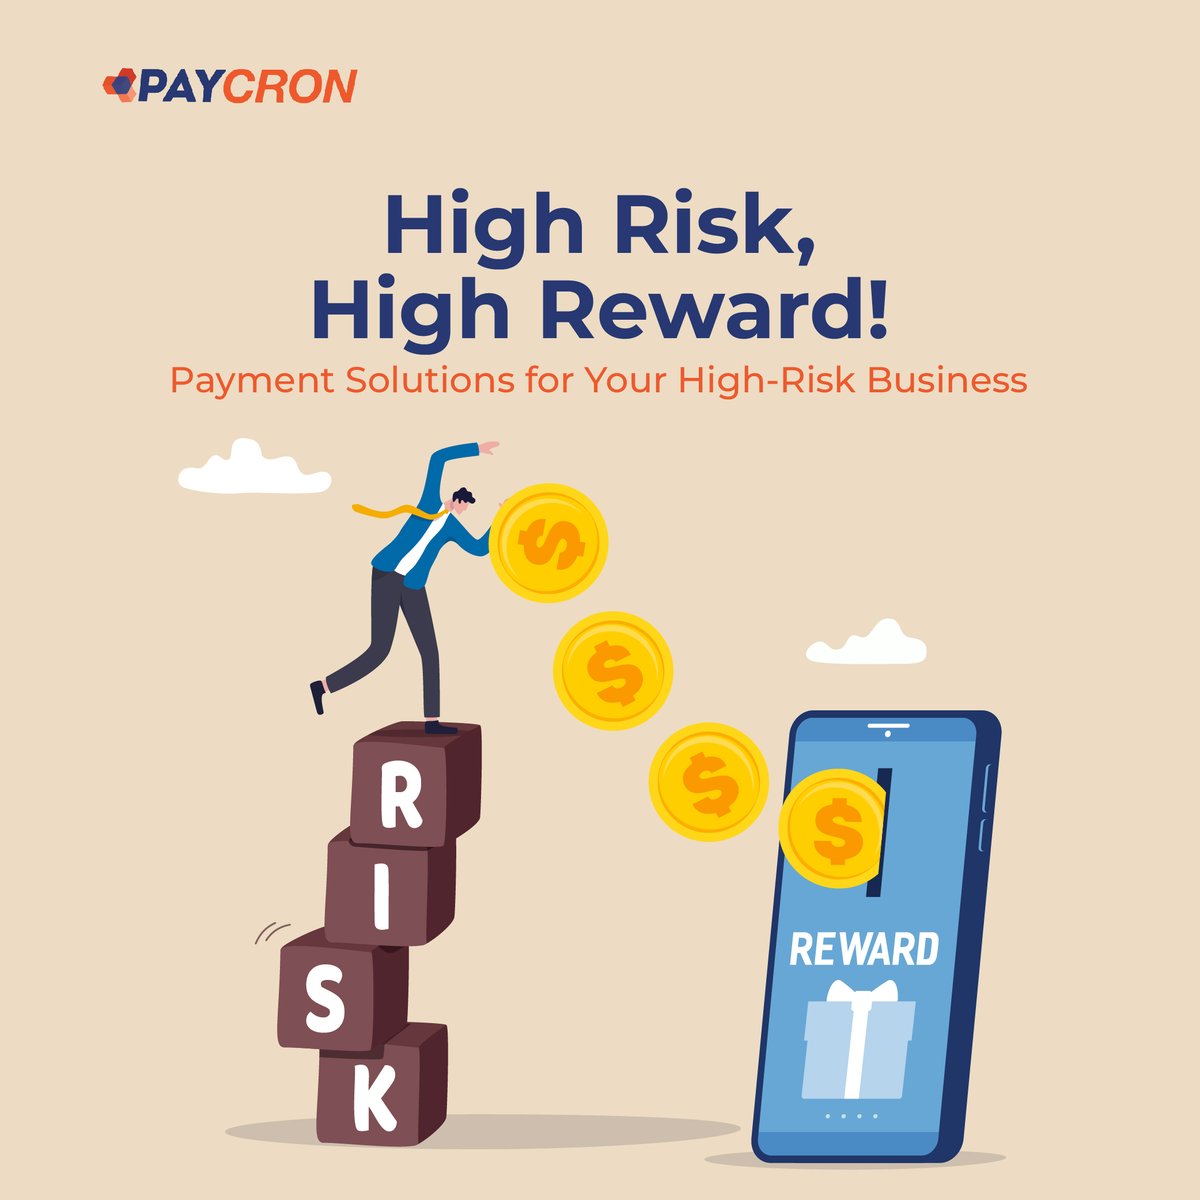 Our payment solutions are tailored to meet the unique needs of your high-risk business, ensuring you can accept payments with confidence.
.
.
.
.
#highriskbusiness #paymentsolutions #businesspayments #FinancialSecurity #paymentprocessing #riskmanagement #merchantservices